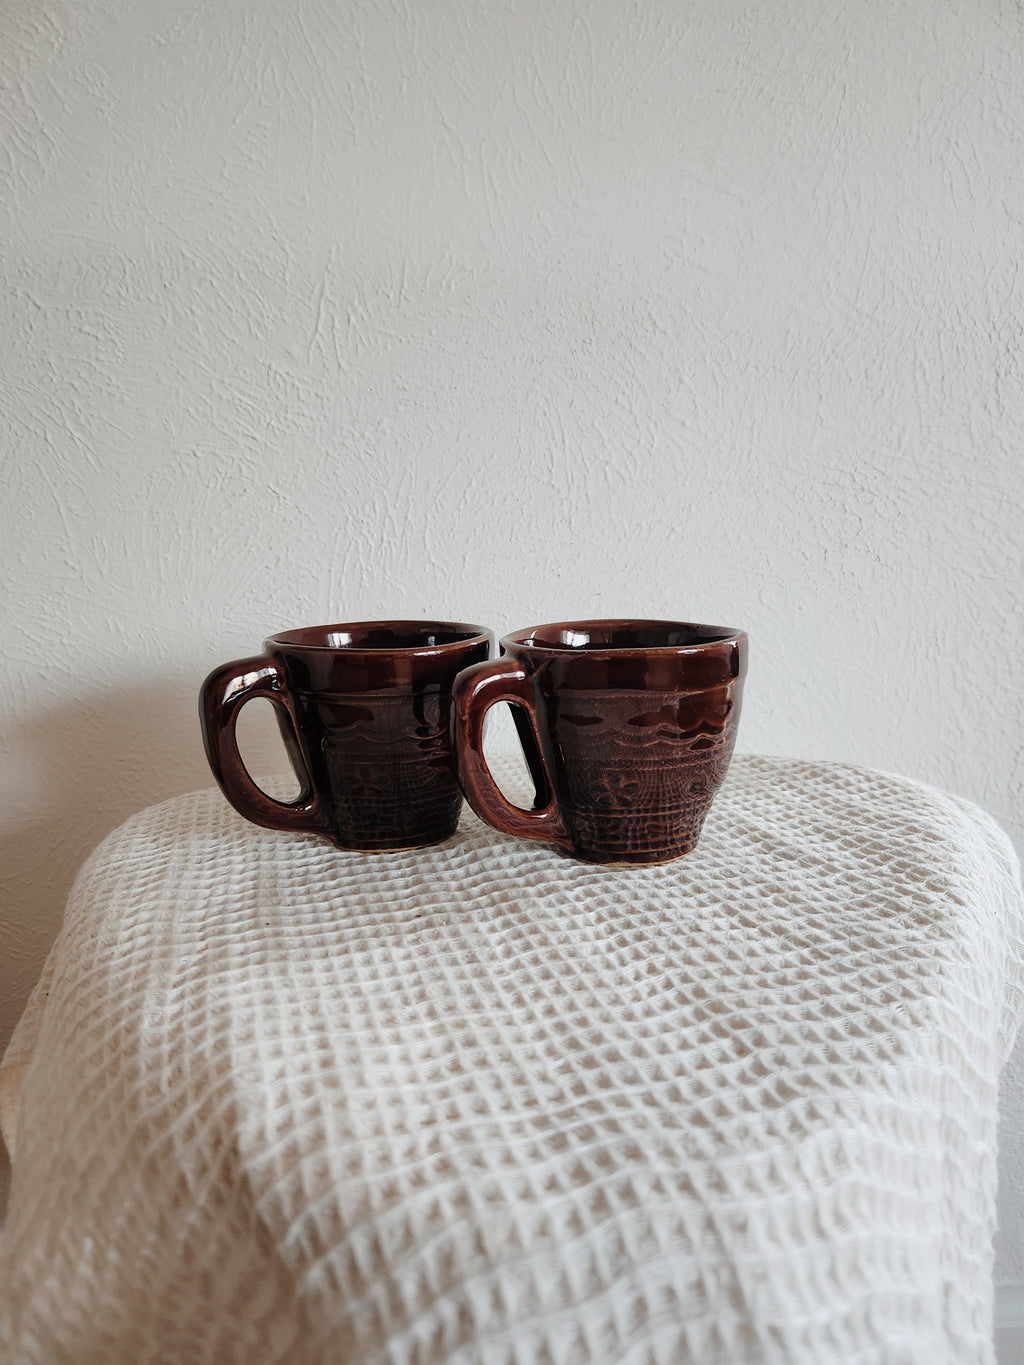 Vintage Coffee Mugs | Made in the USA |